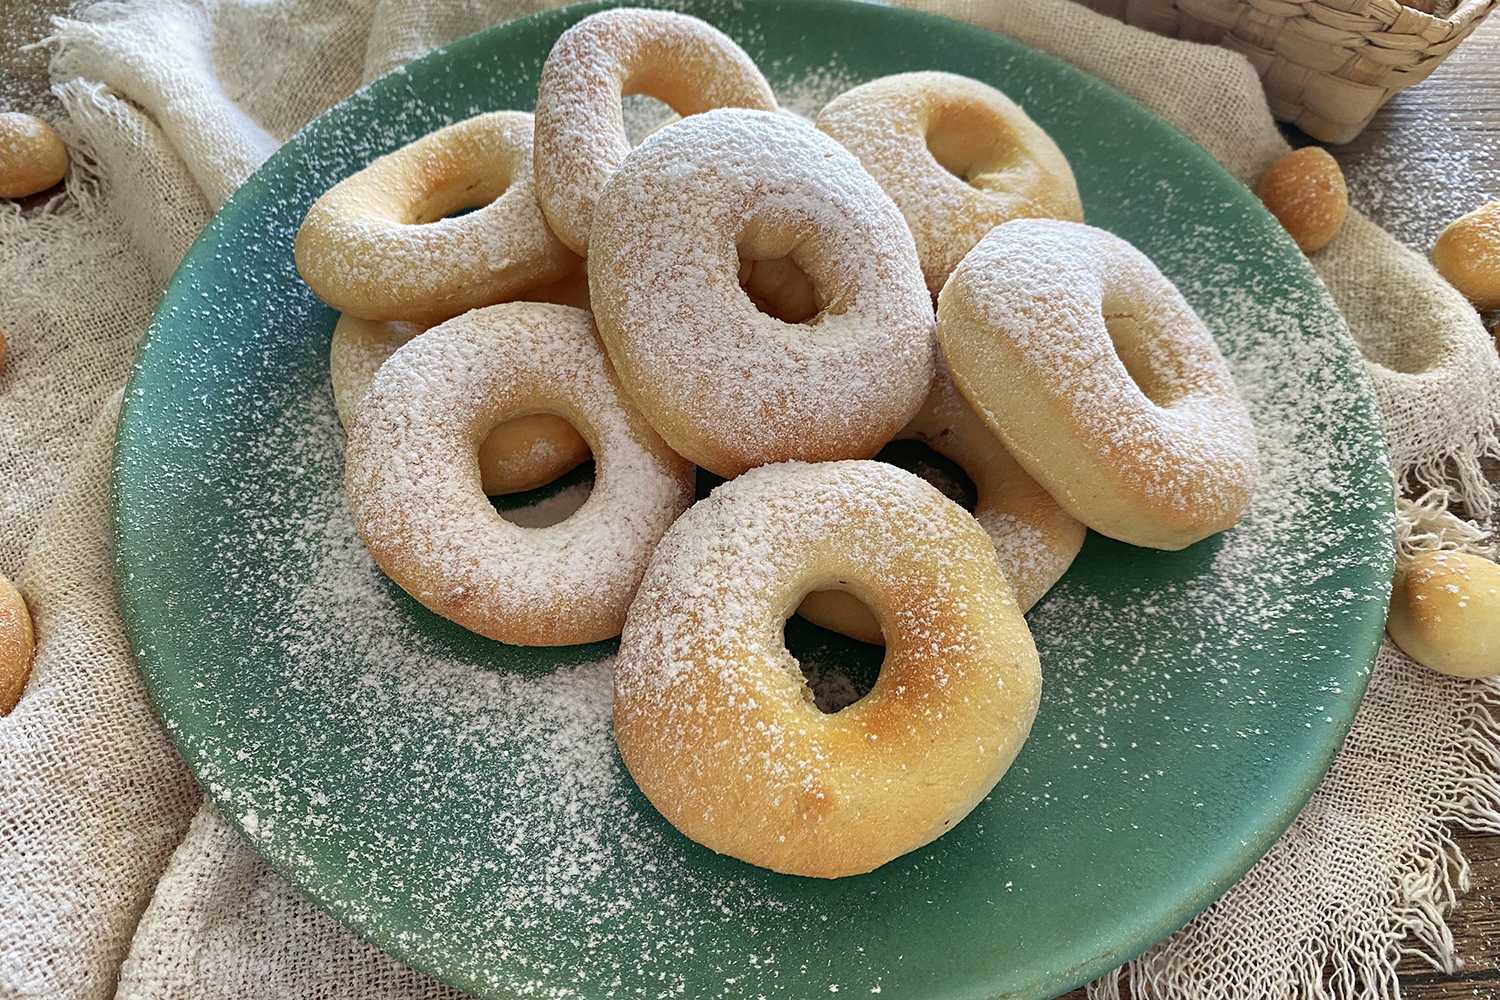 Small homemade donuts on each other with sugar powder on top and on the plate